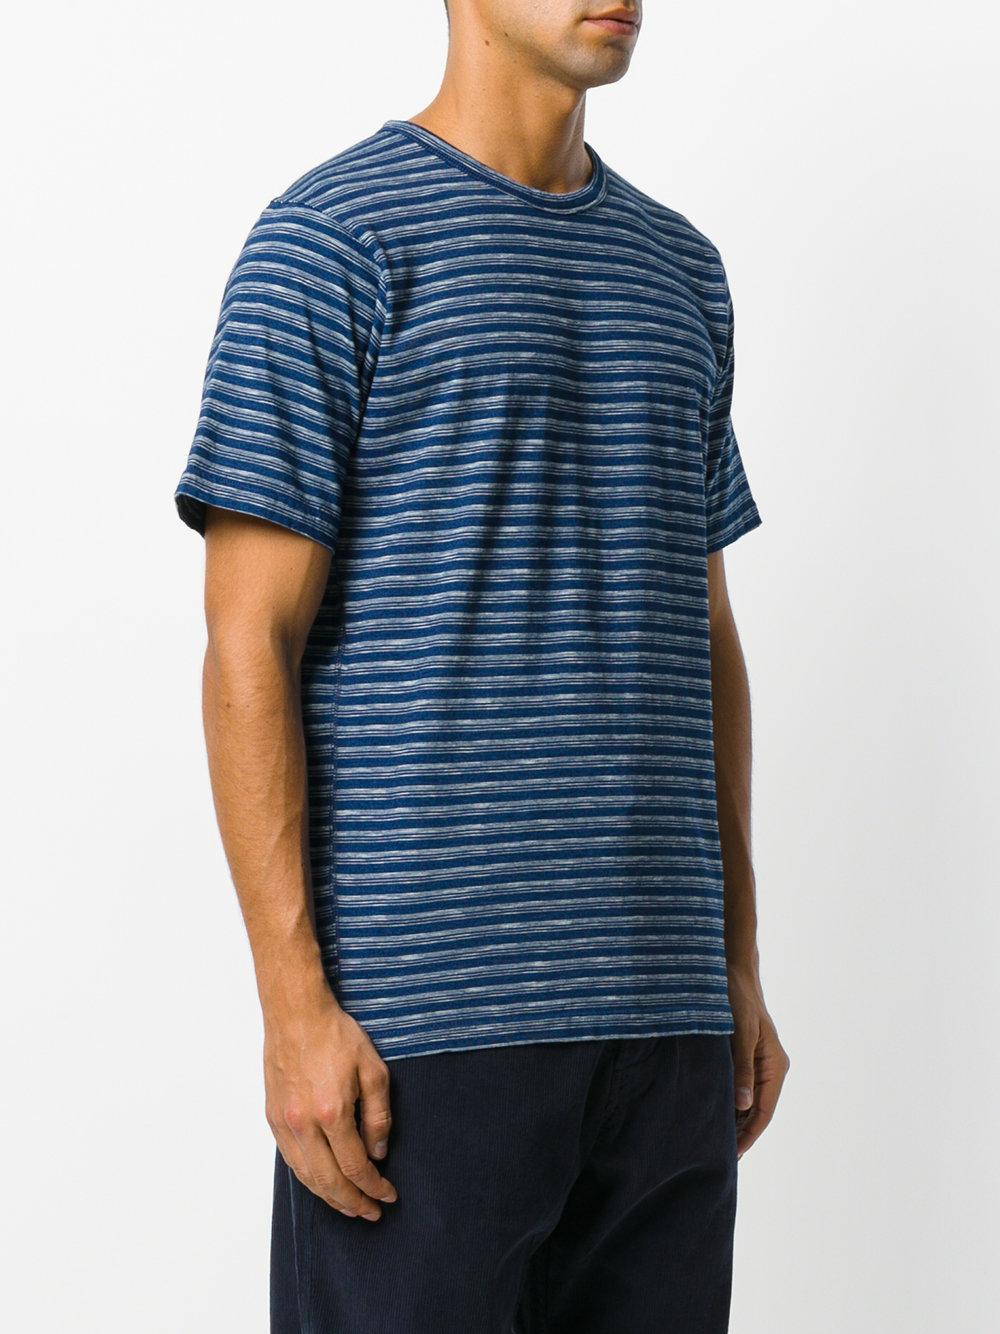 Lyst - Universal Works Striped T-shirt in Blue for Men